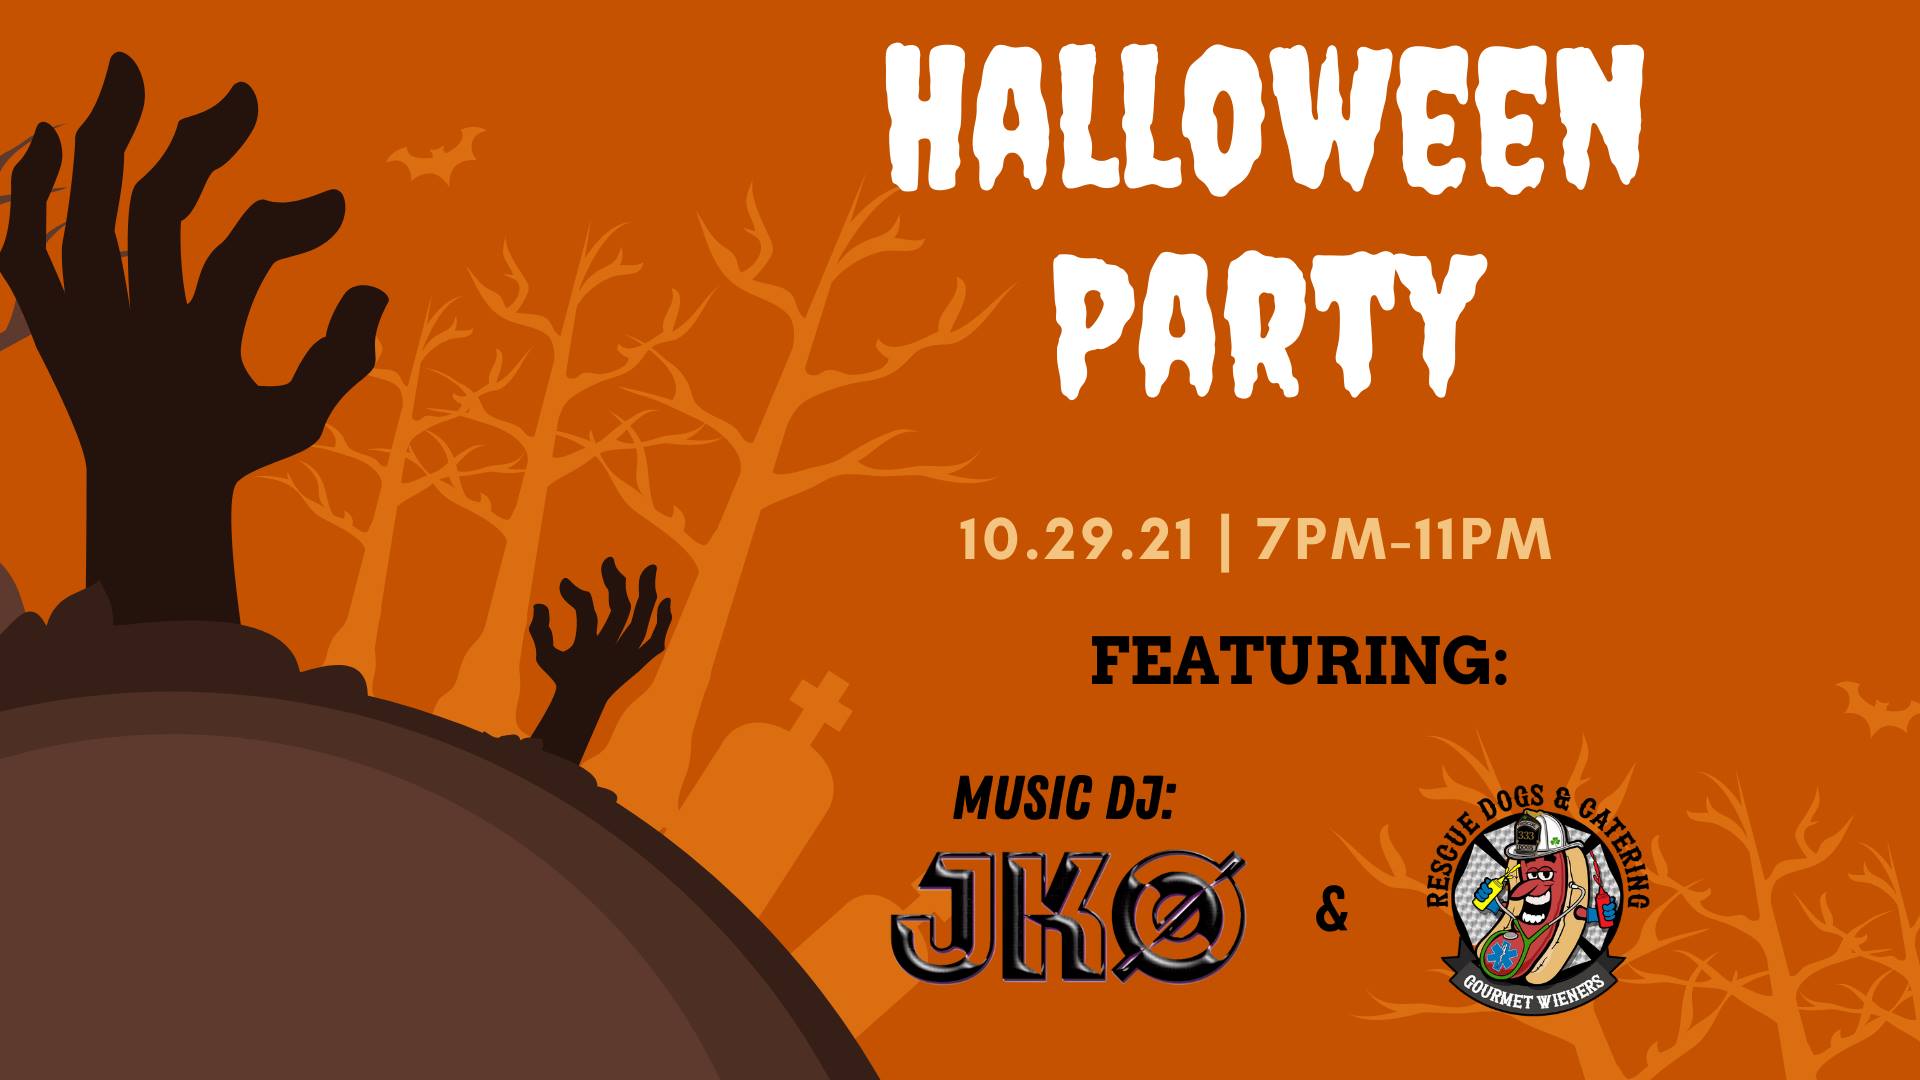 Halloween Party at Lonerider Brewery